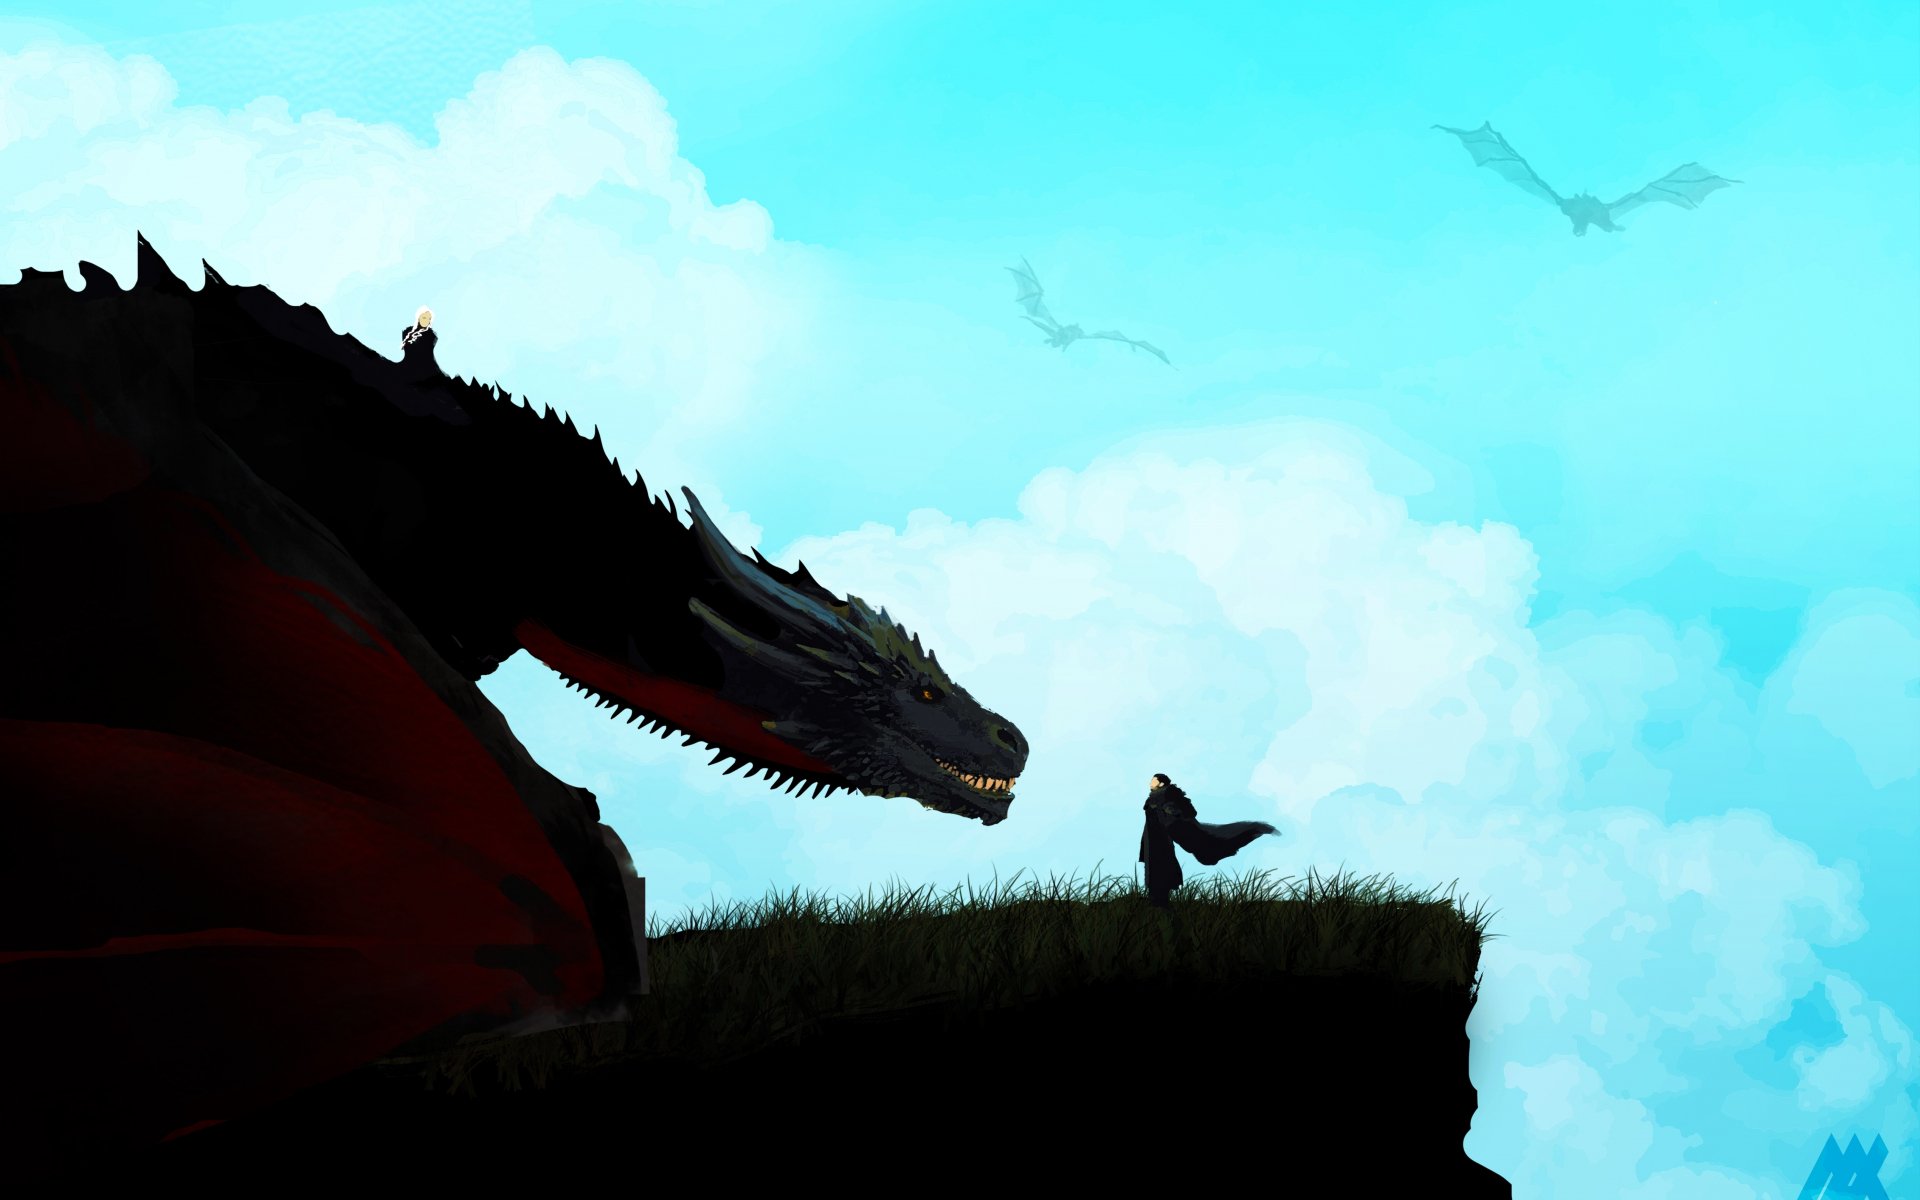 Download jon snow and dragon, game of thrones, art 1920x1200 wallpaper, 16:10 widescreen 1920x1200 HD image, background, 9767